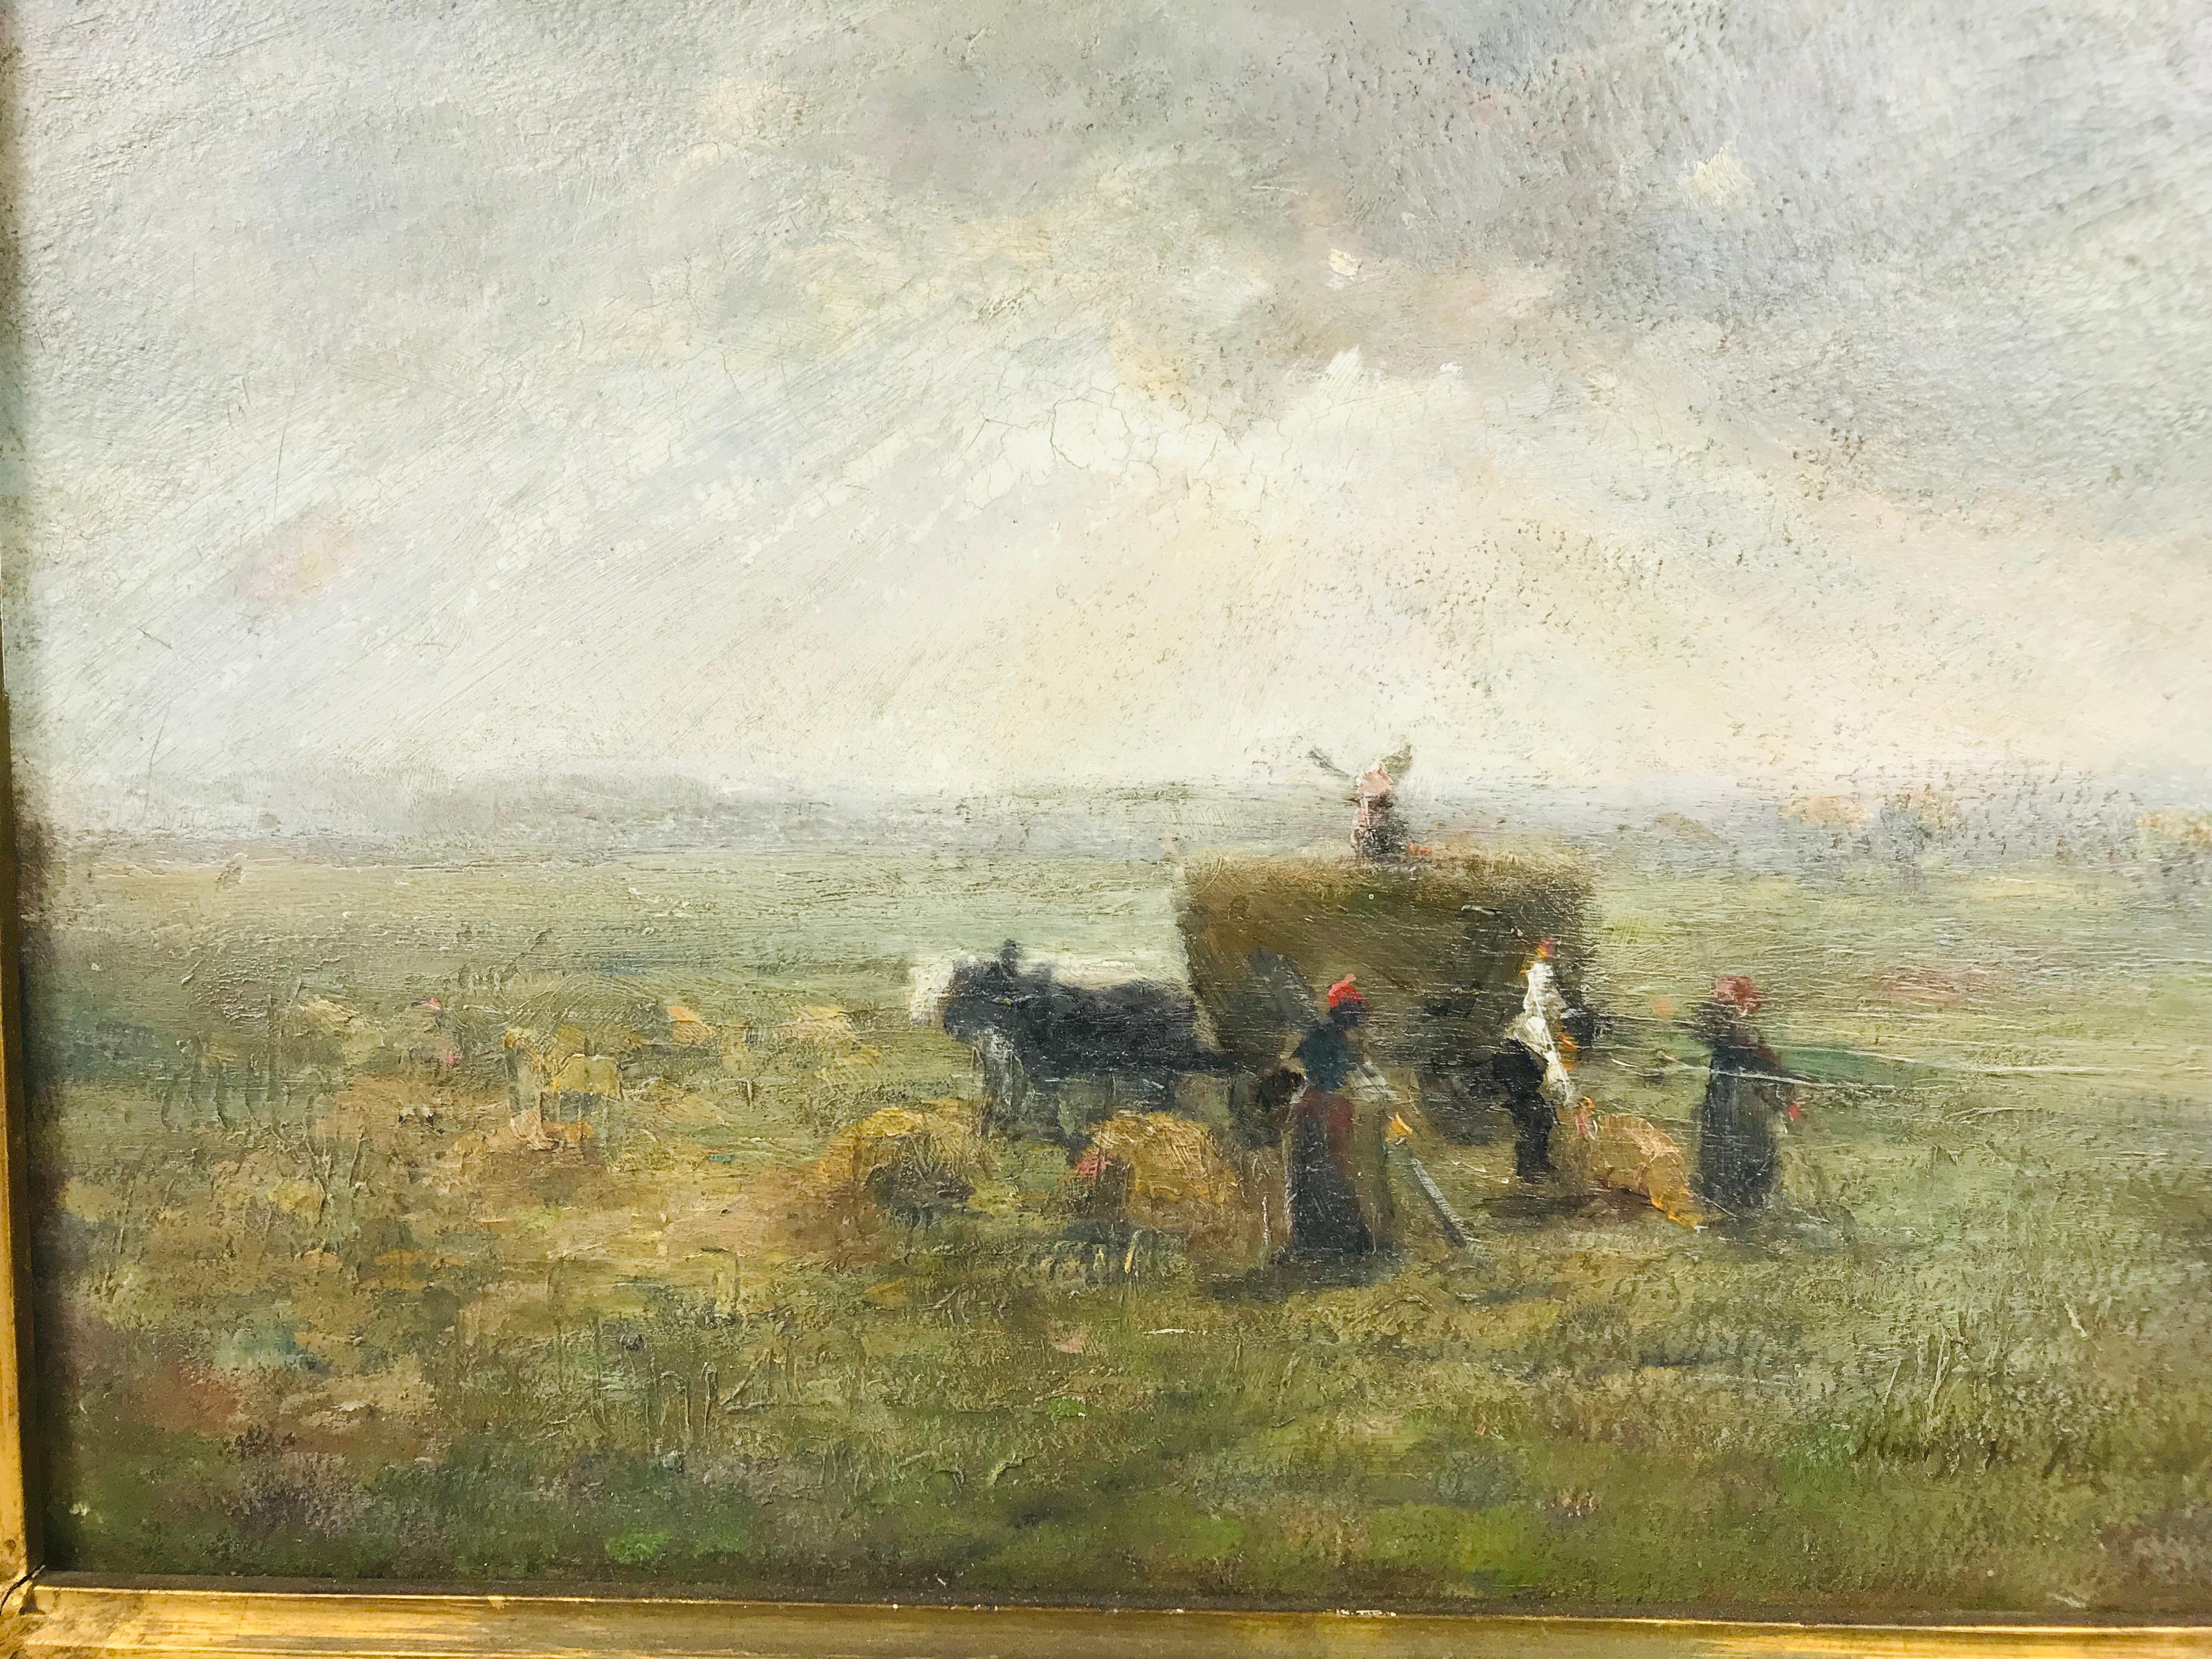 An atmospheric oil on canvas by listed artist Henry Hammond Ahl (1869-1953). This painting depicts a group of village farmers setting out upon the fields to establish their grounds for harvest. A forecasting of clouds and fog dissipate as these